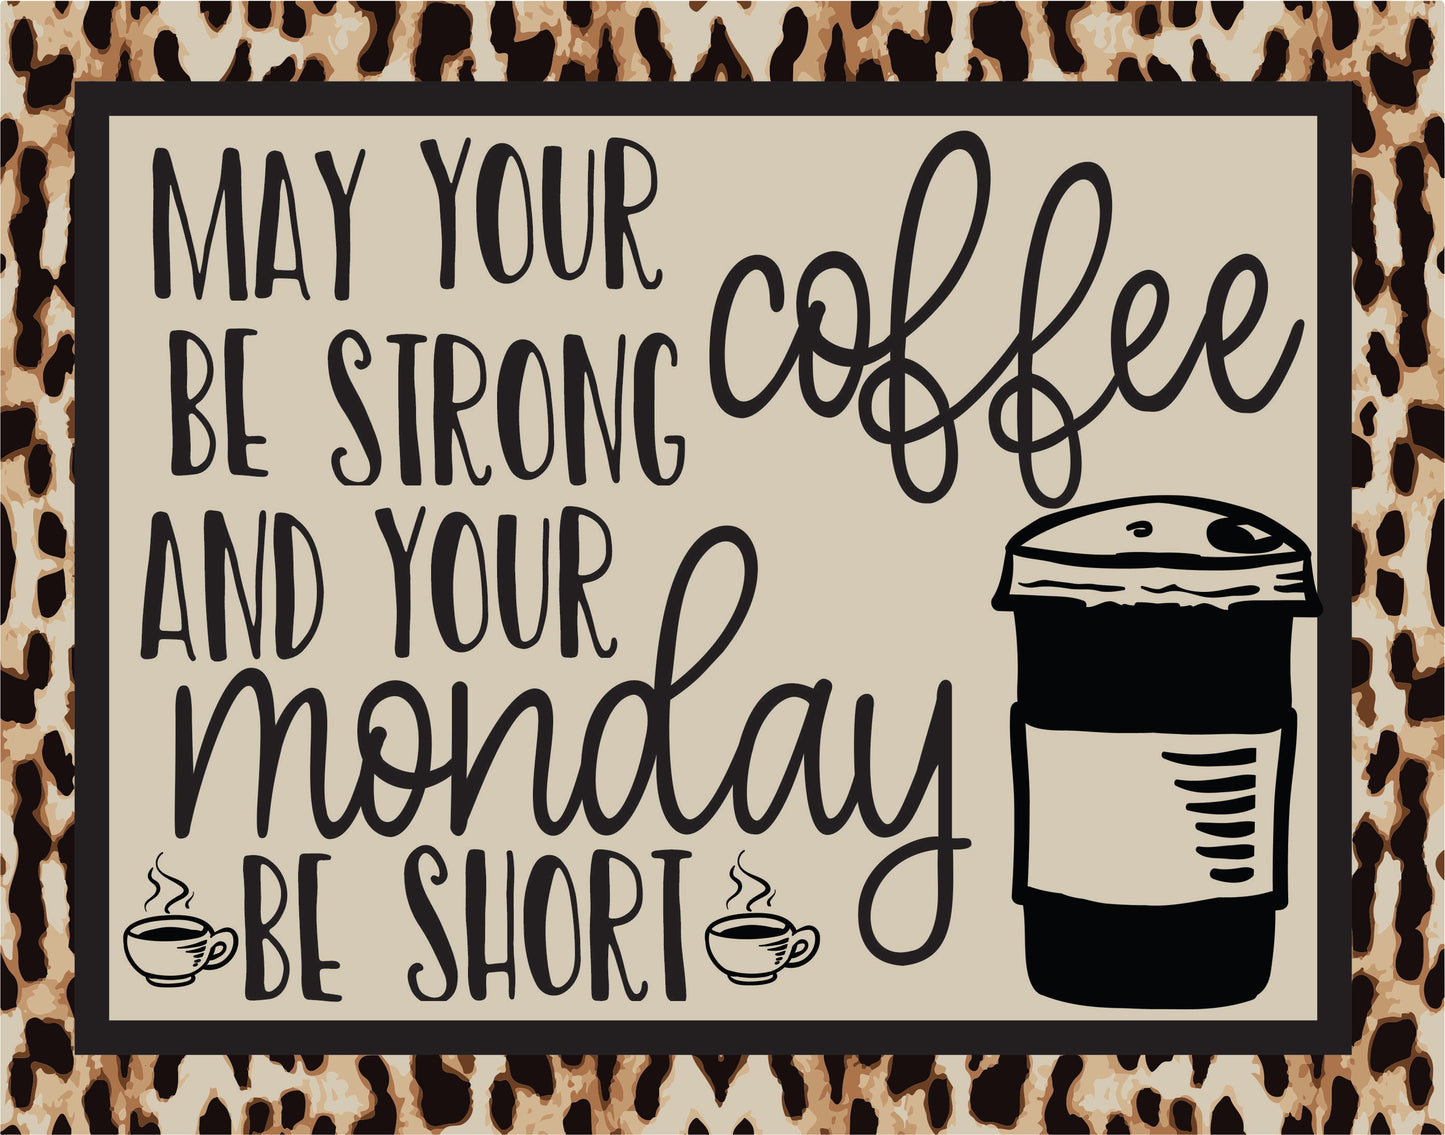 May Your Coffee Be Strong and Your Monday Be Short